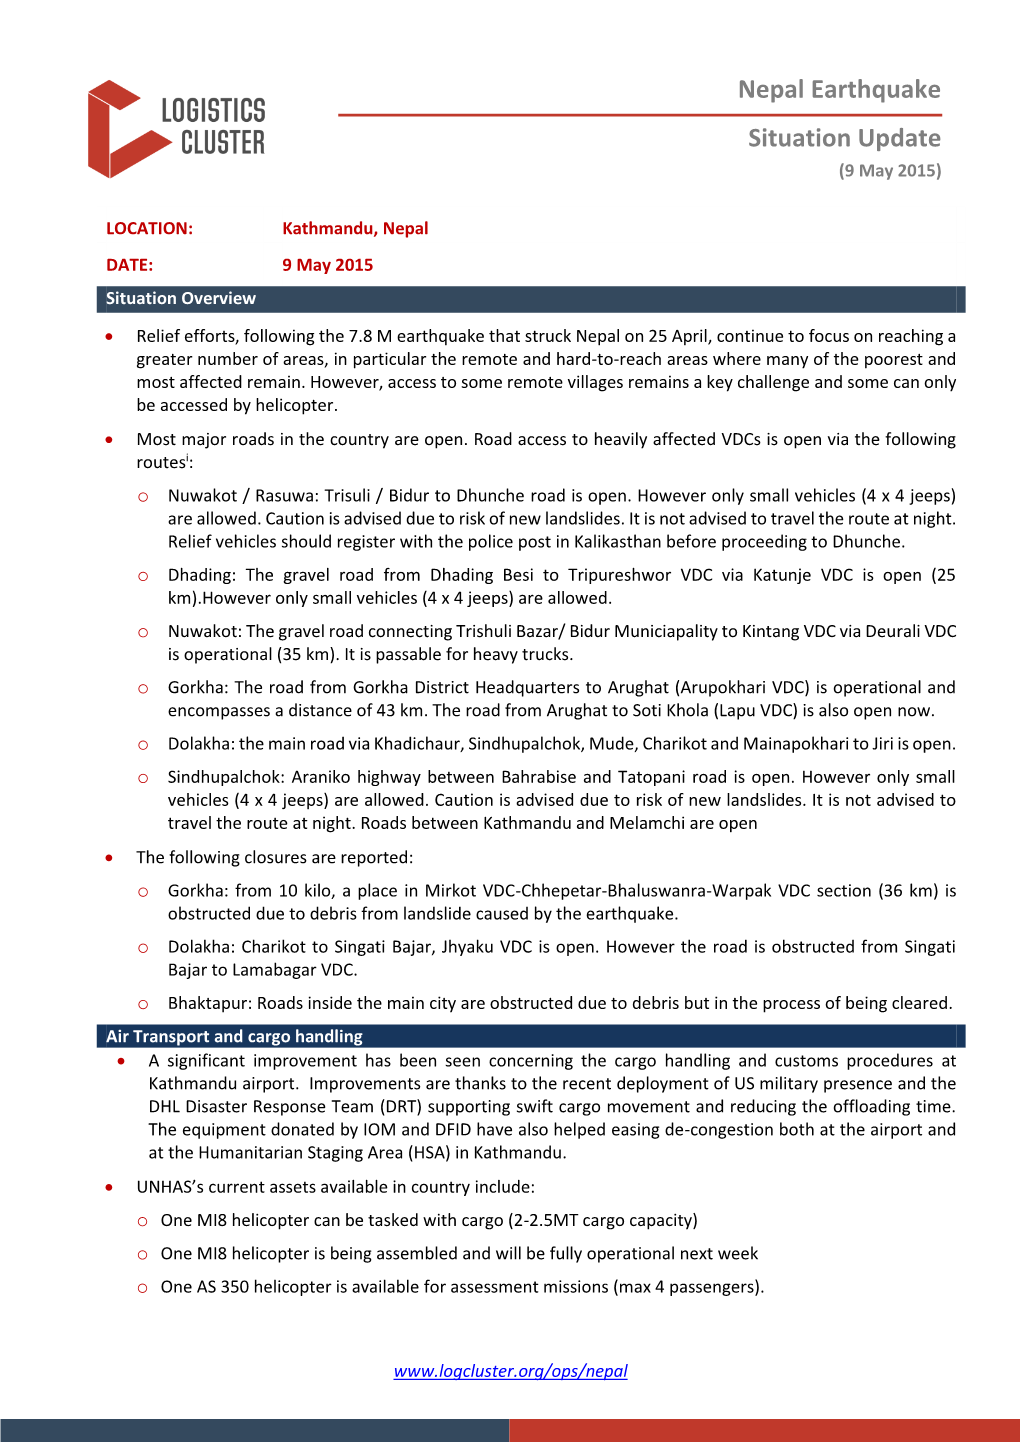 Nepal Earthquake Situation Update (9 May 2015)